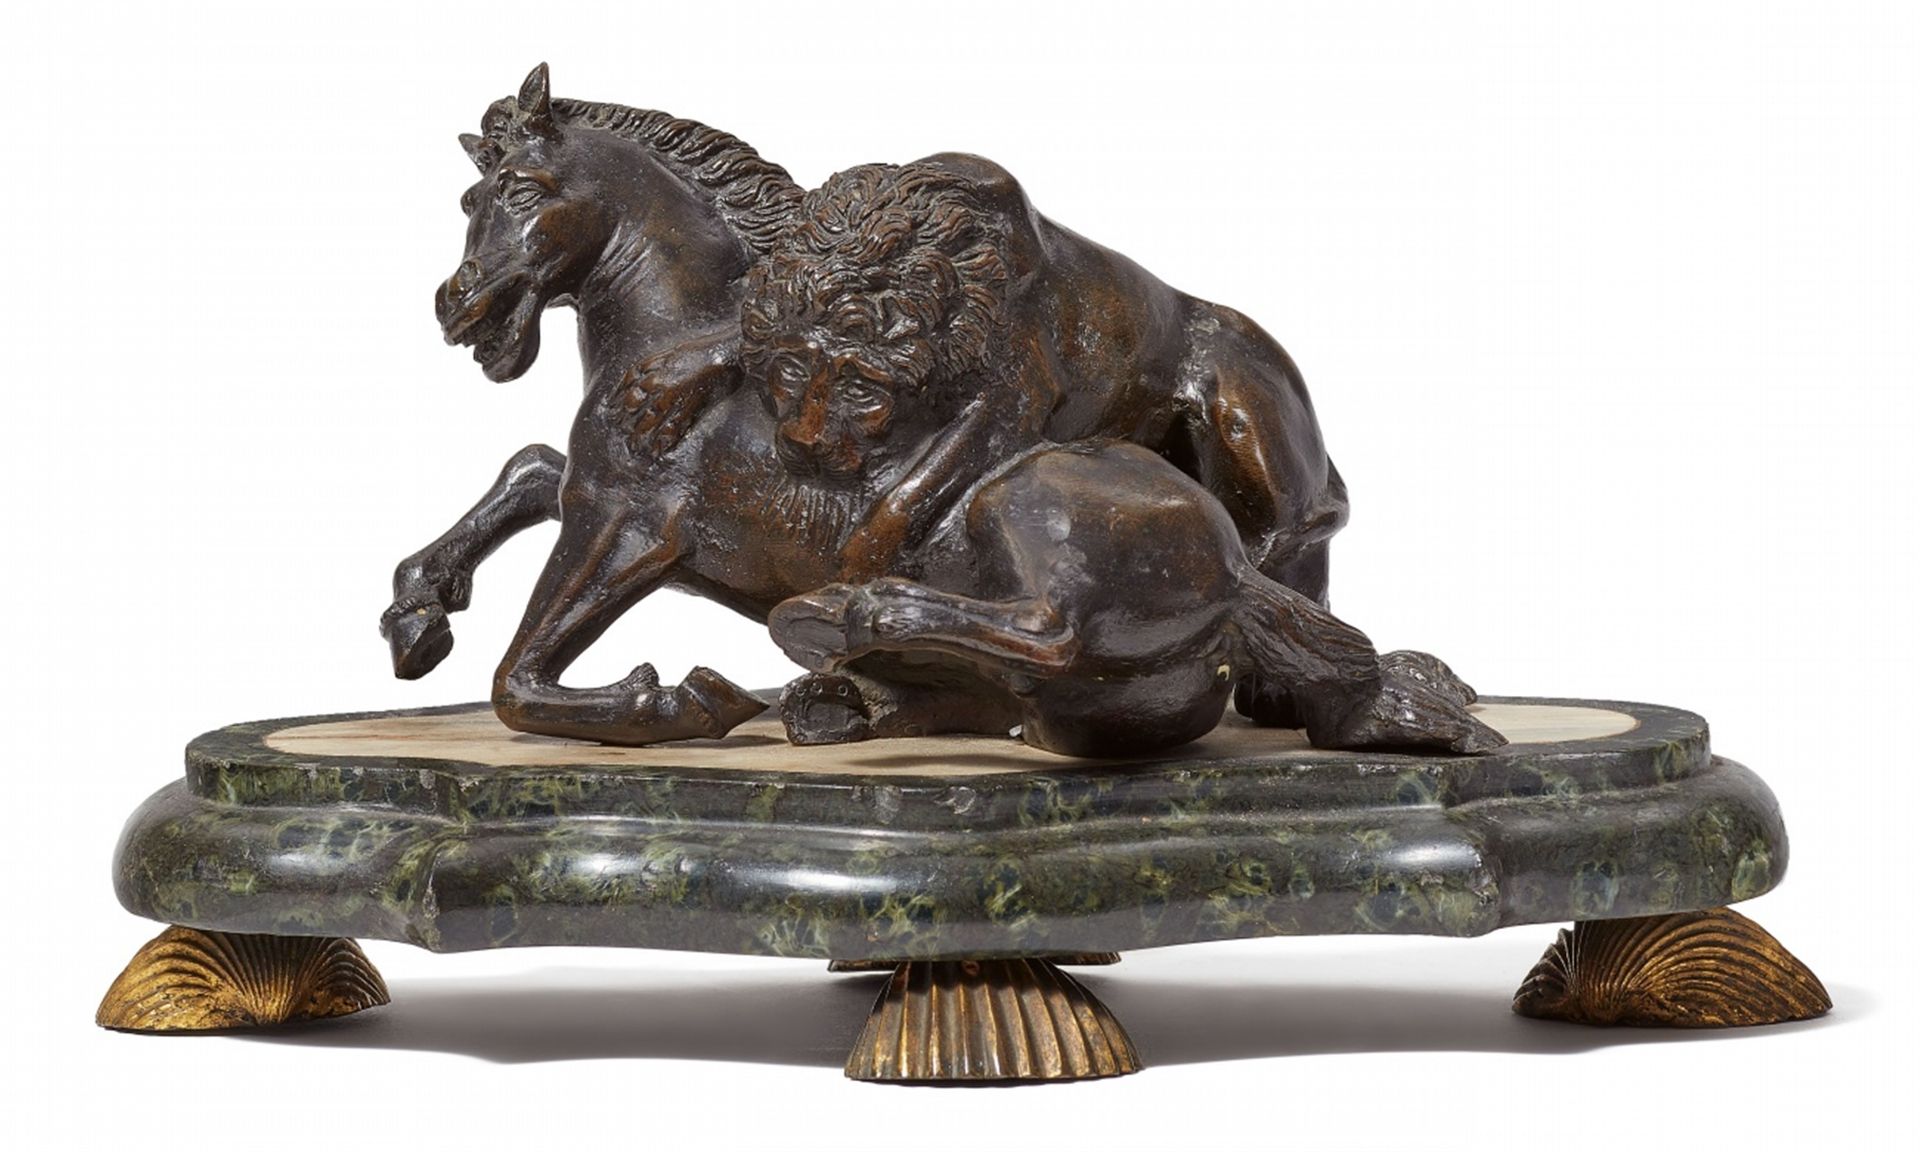 A bronze model of a lion attacking a horse